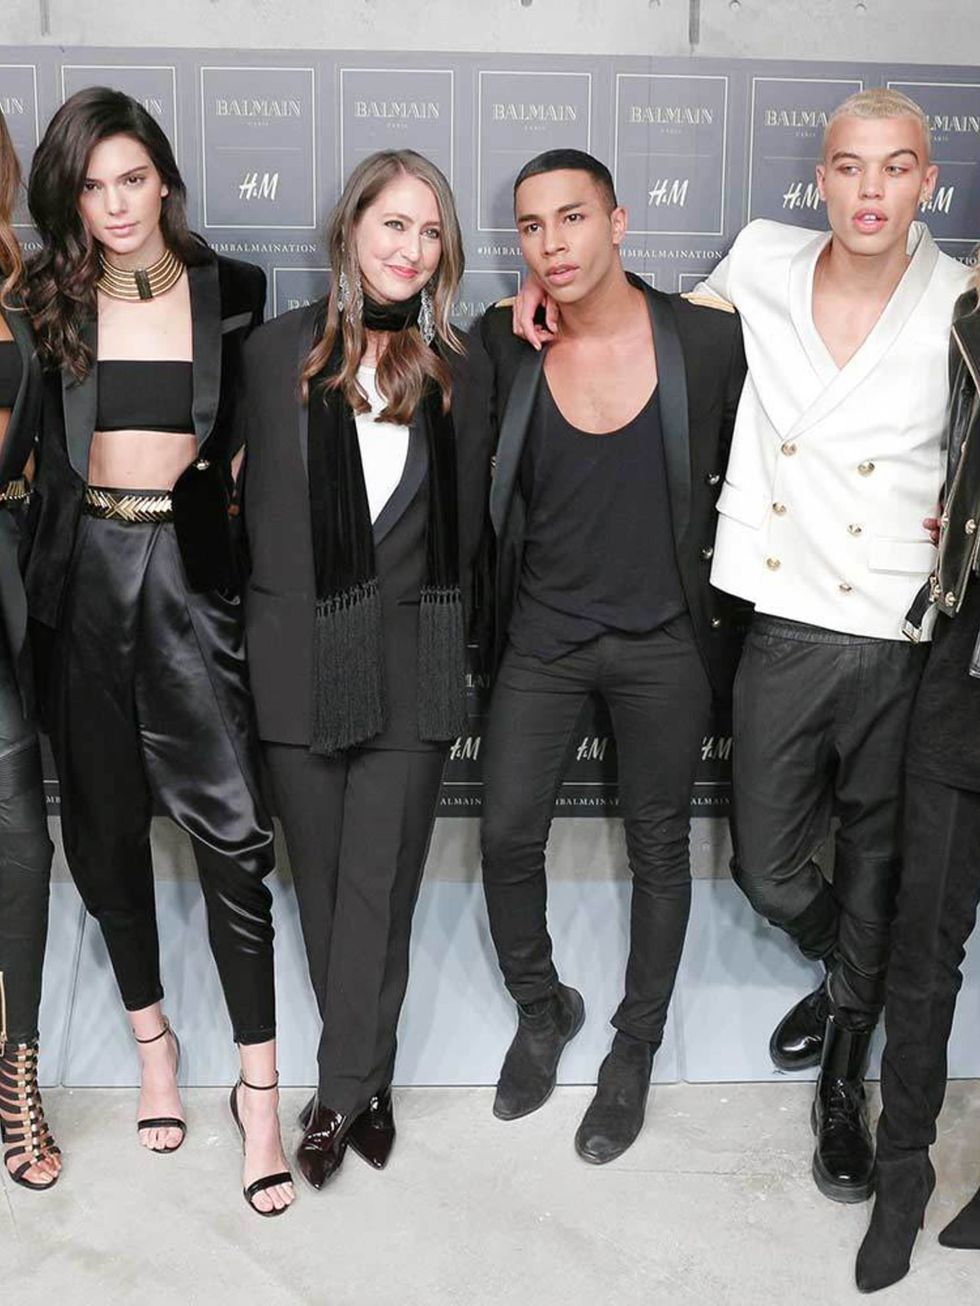 Jourdan Dunn, Kendall Jenner, Ann Sofie Johansson, Olivier Rousteing, Dudley O'Shaughnessy and Gigi Hadid backstage at the H&M x Balmain show in New york, October 2015.